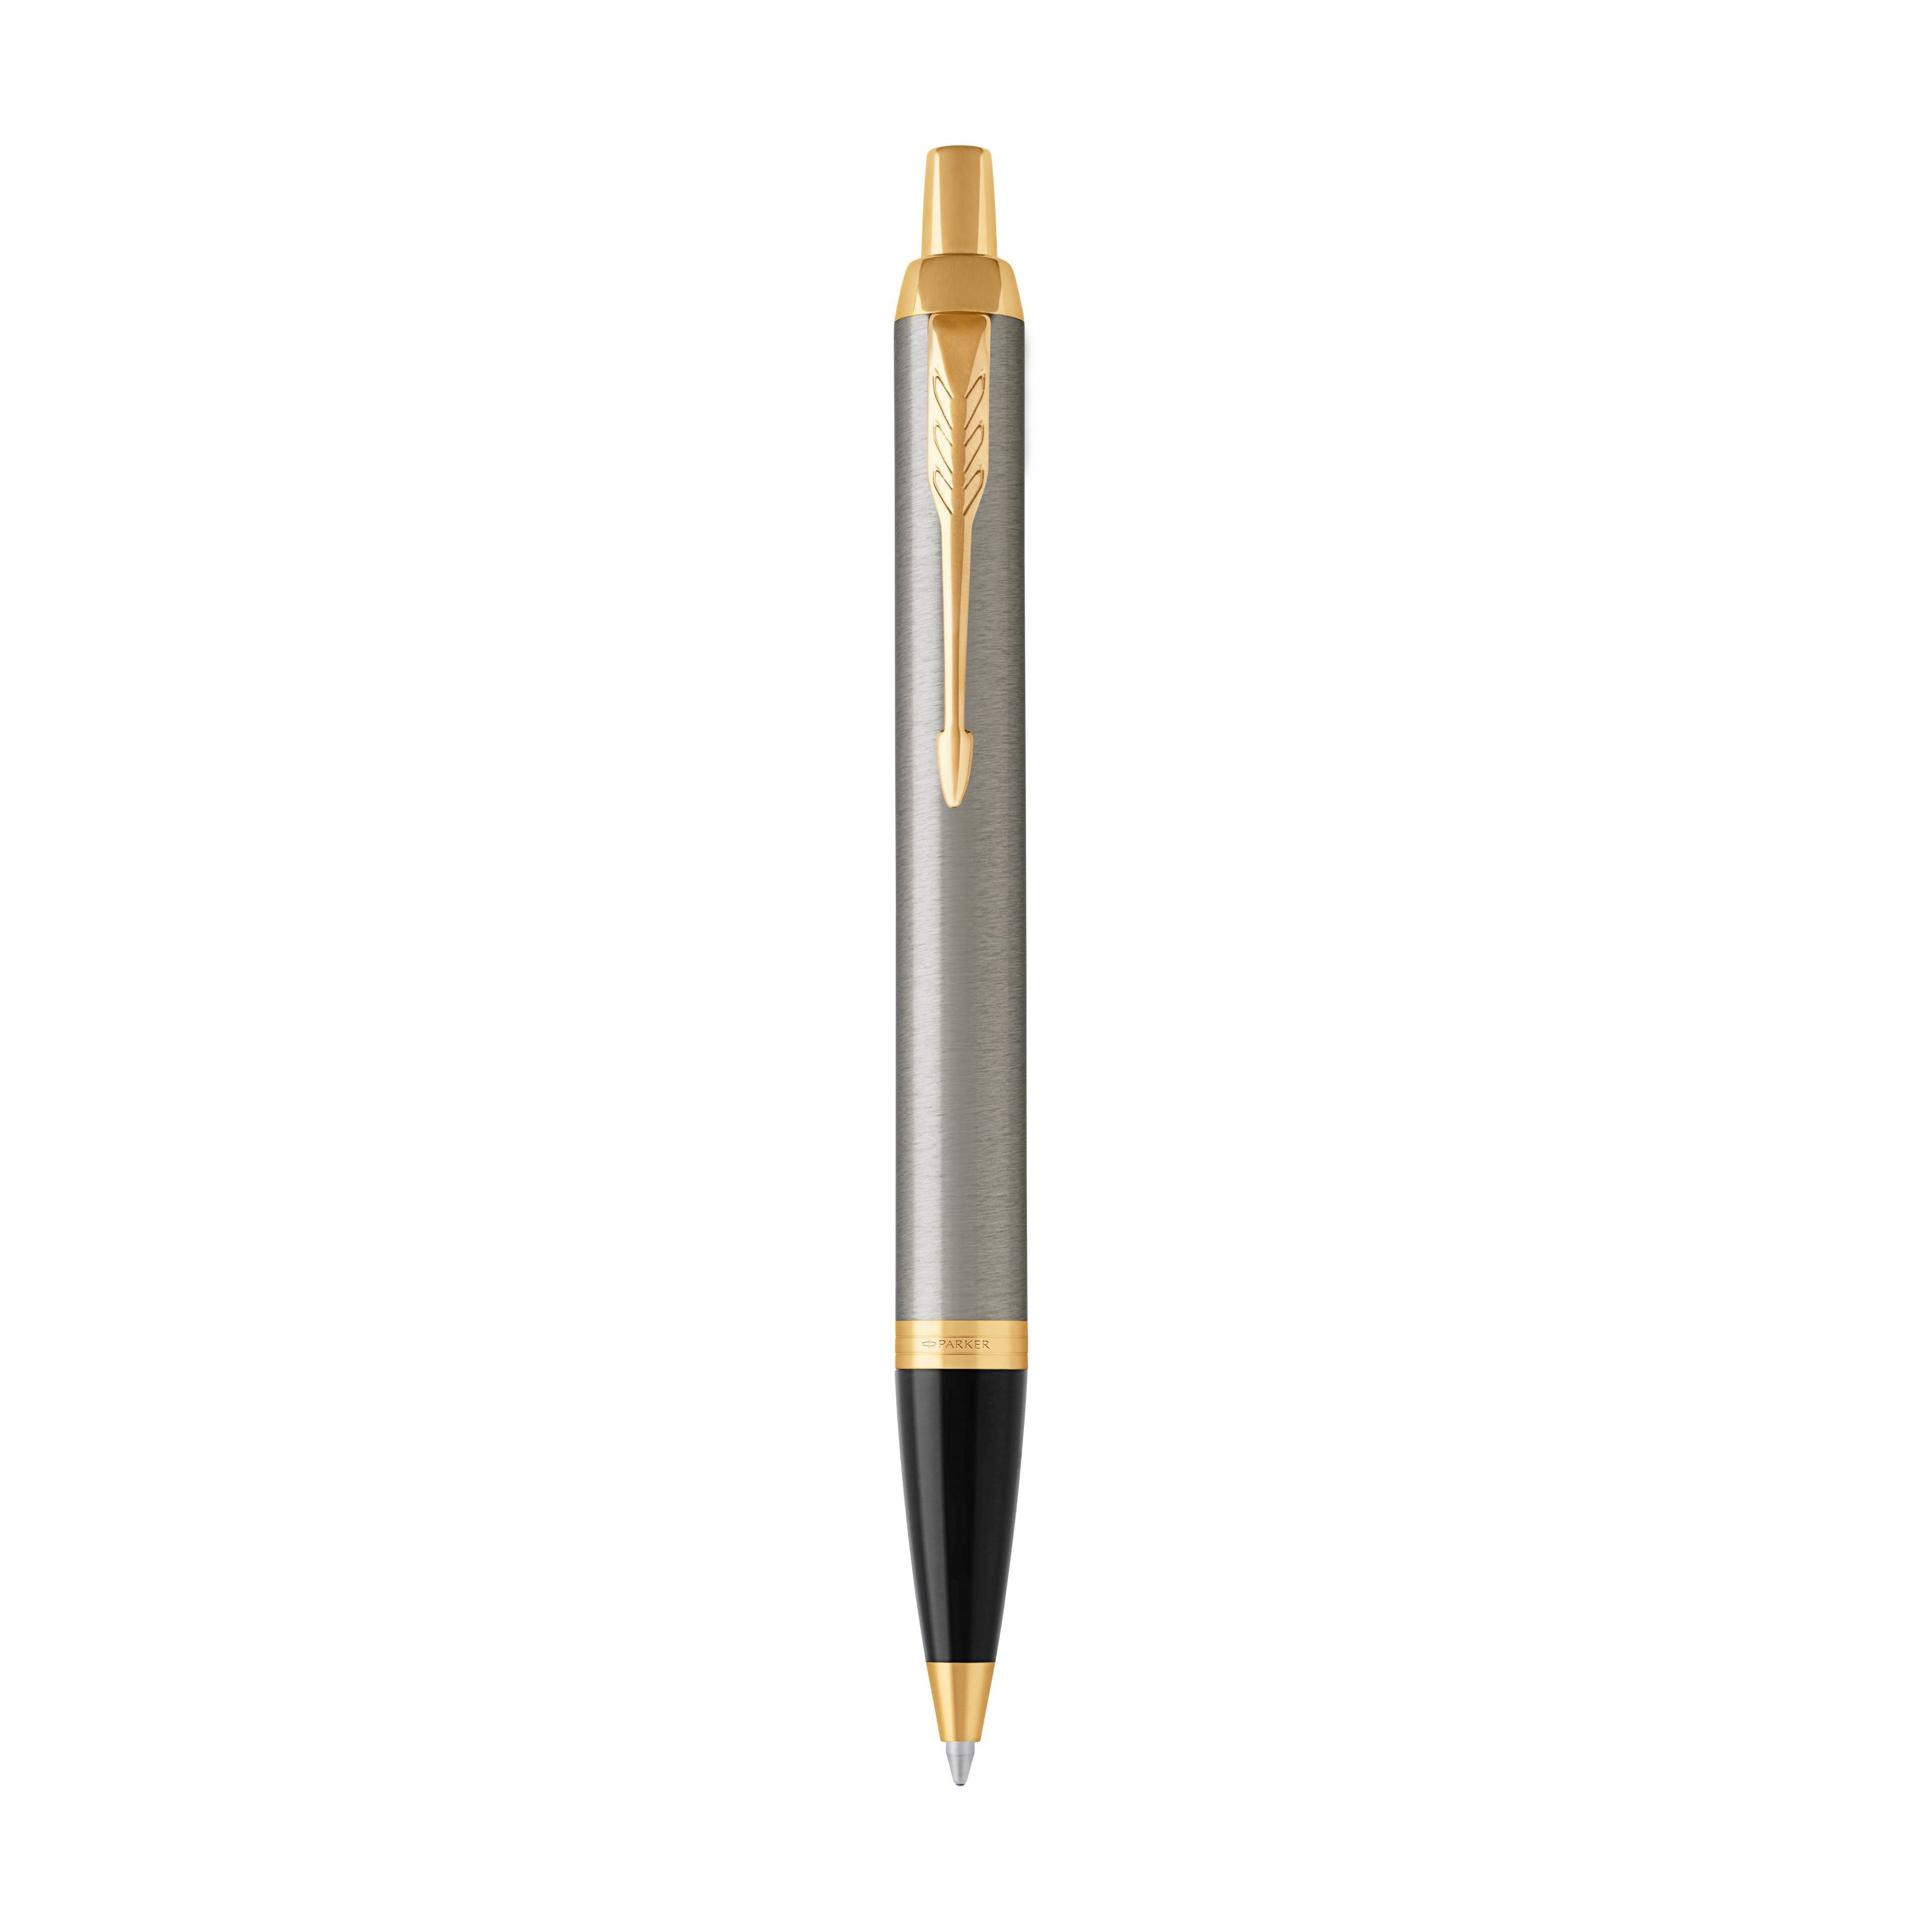 Parker IM Brushed Metal Gold Trim Ballpoint - Pencraft the boutique